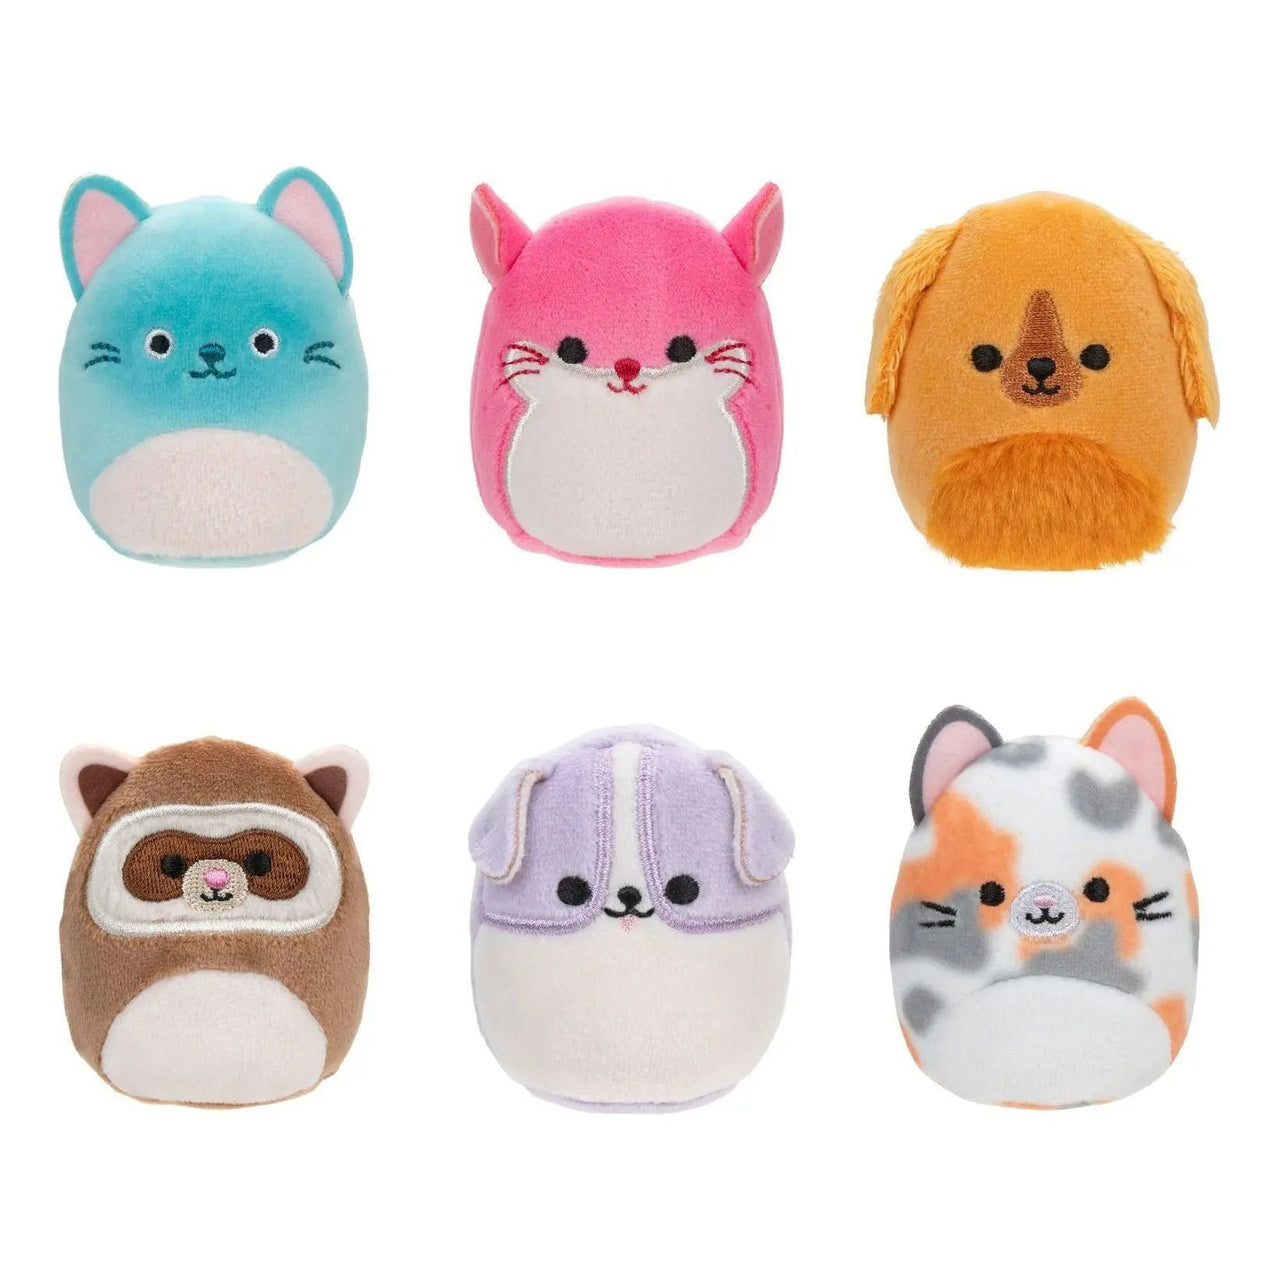 Squishville 2" Perfect Pals 6 Pack Squishmallows